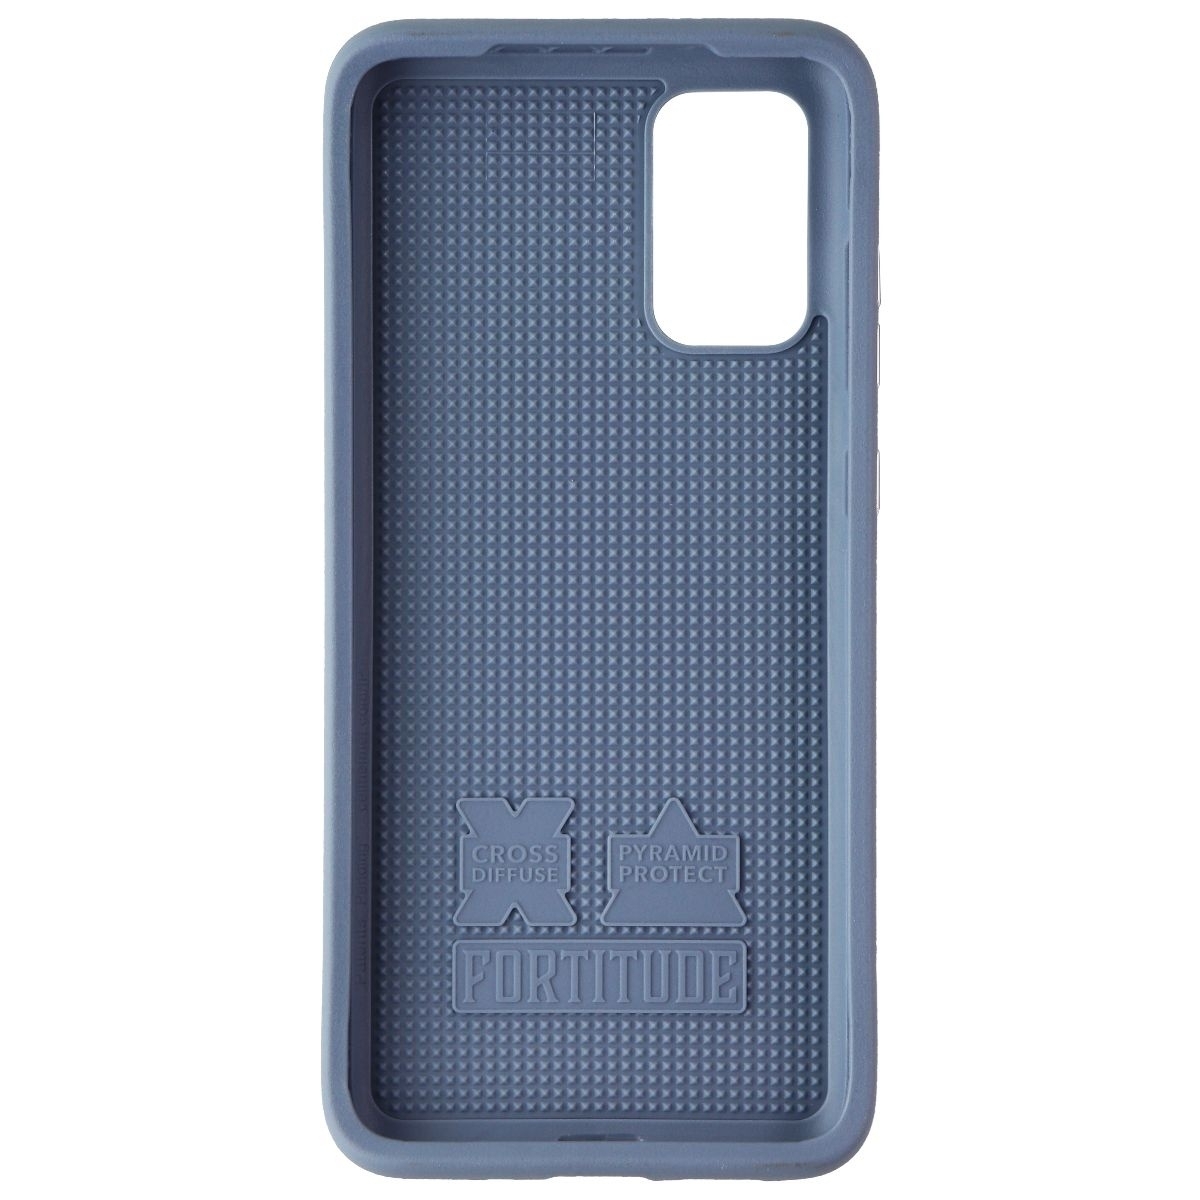 Cellhelmet Fortitude Pro Series Slate Blue Dual Layer Case For Galaxy S20 Plus